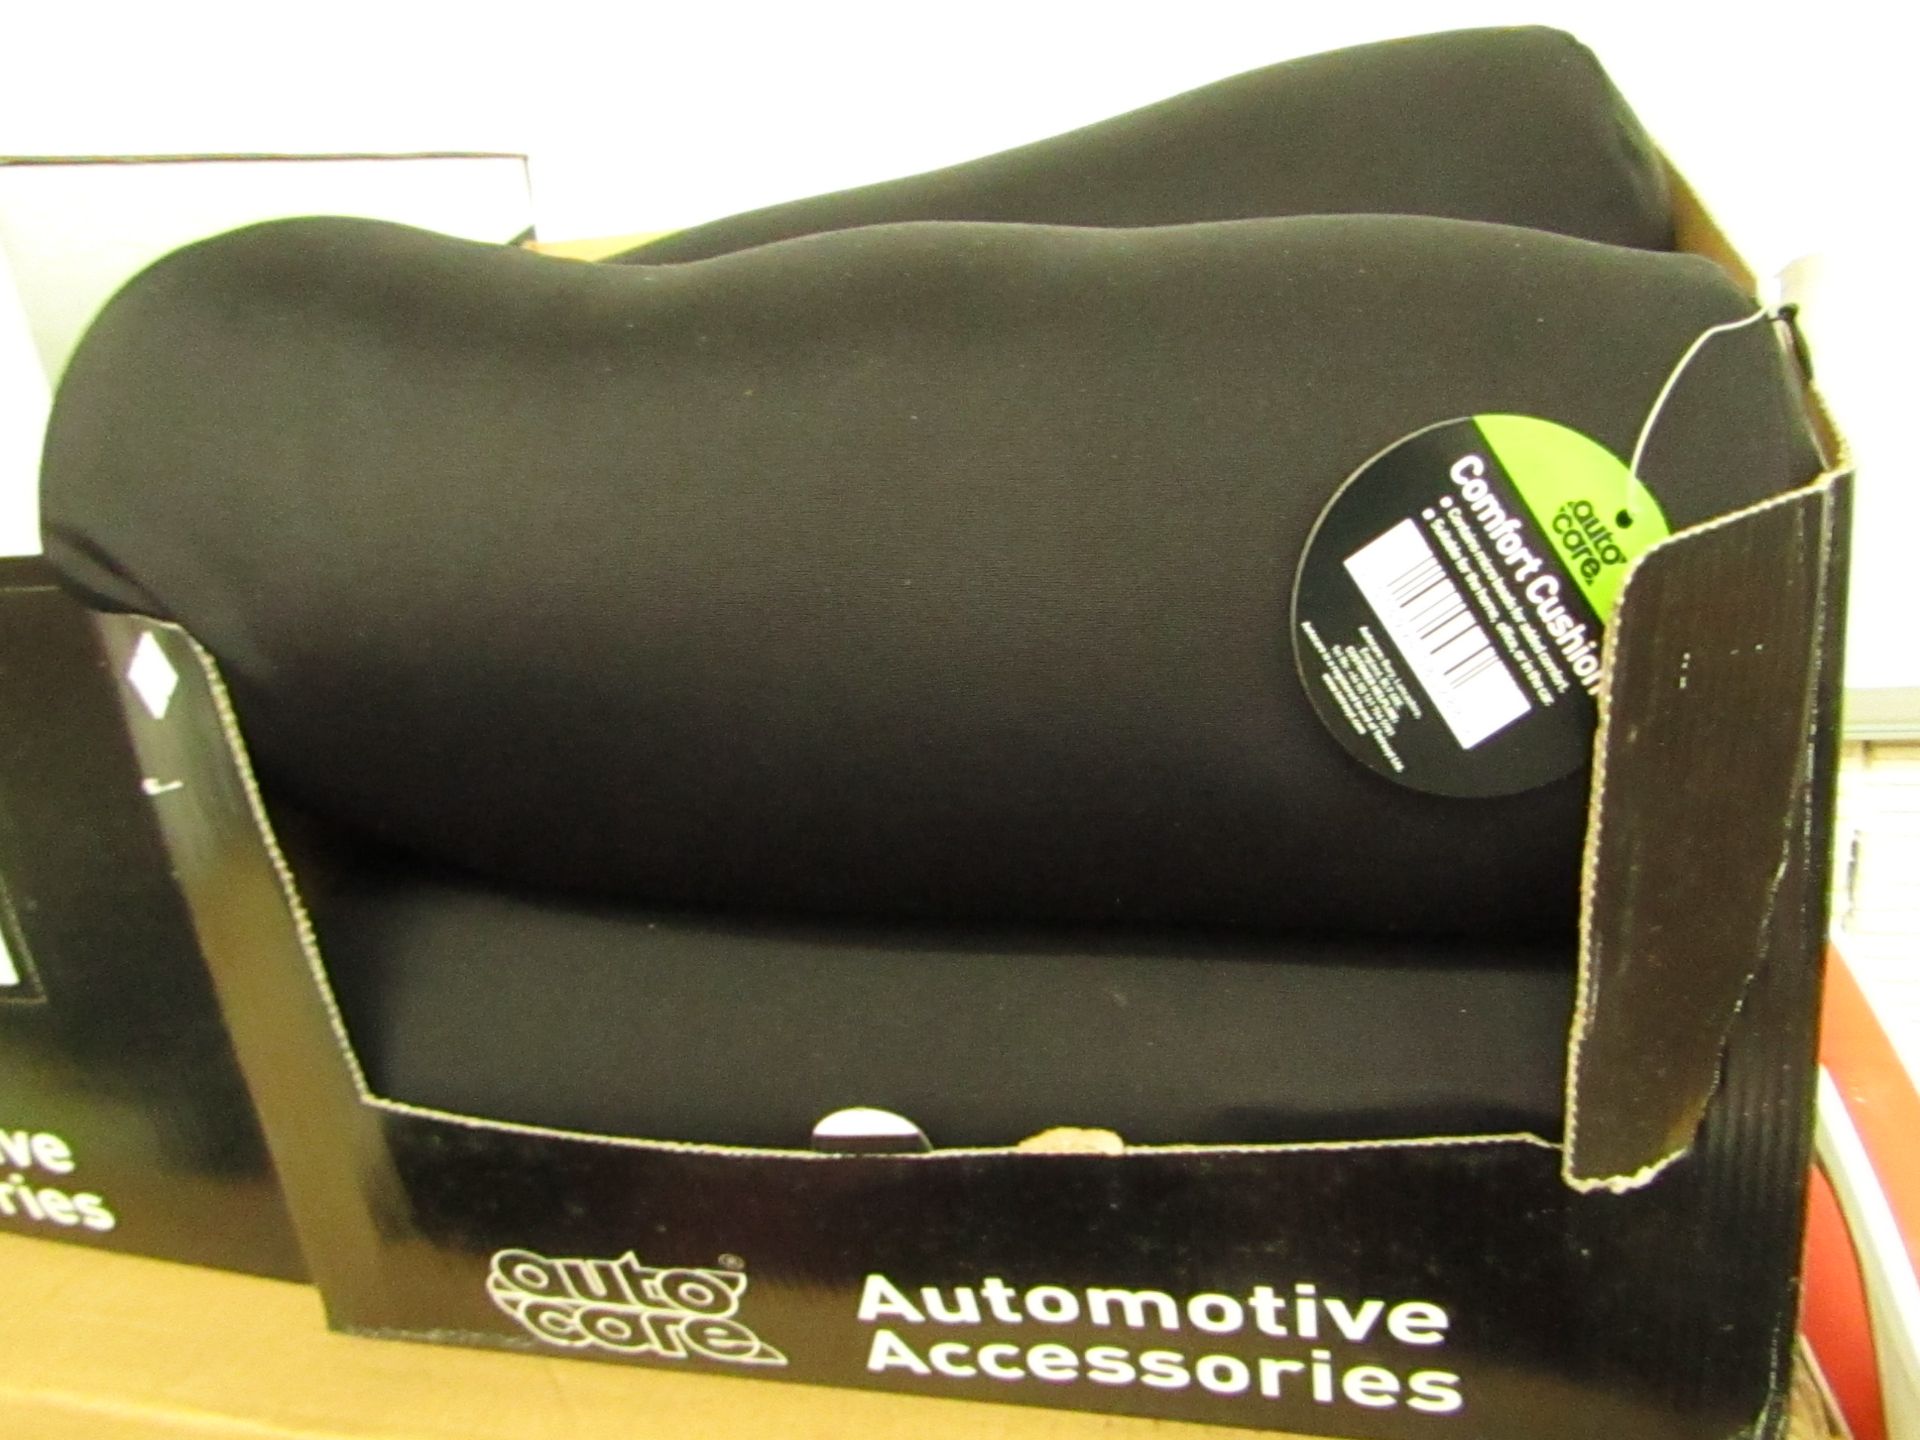 4 x AutoCare Neck Cushions. PerfectFor Long Journeys. New & Boxed